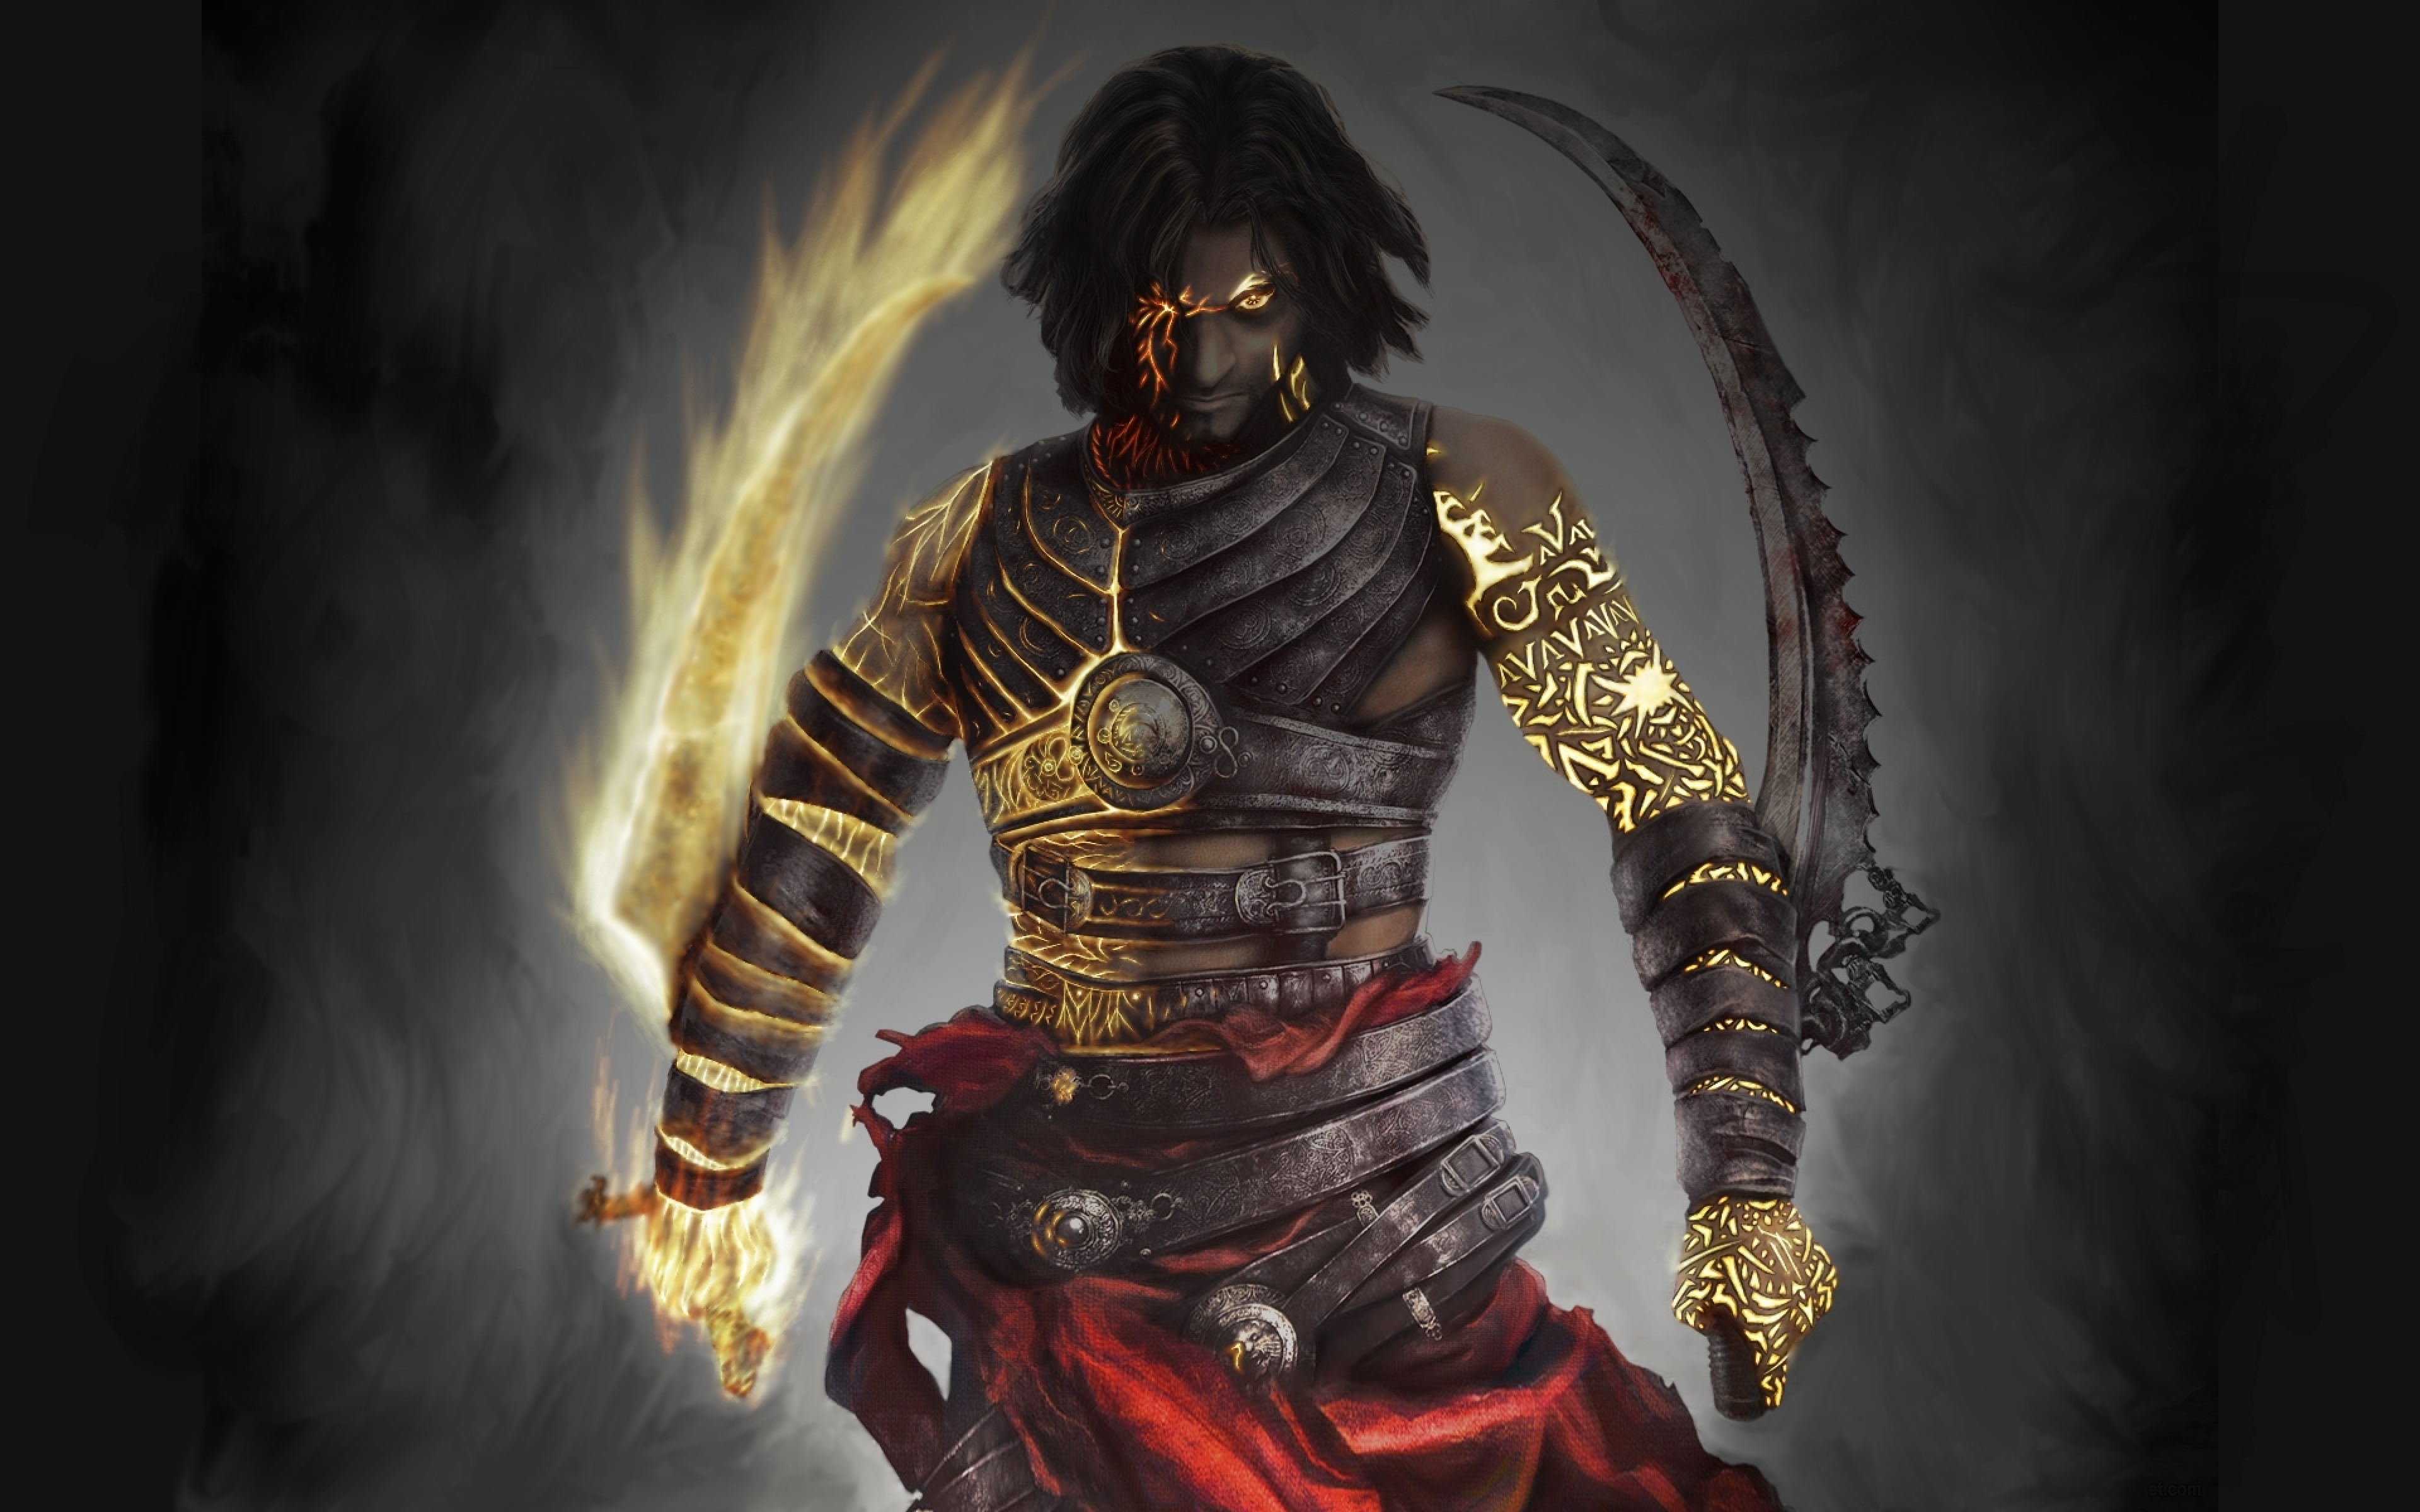 prince_of_persia_warrior_within_art_game_97815_3840x2400.jpg